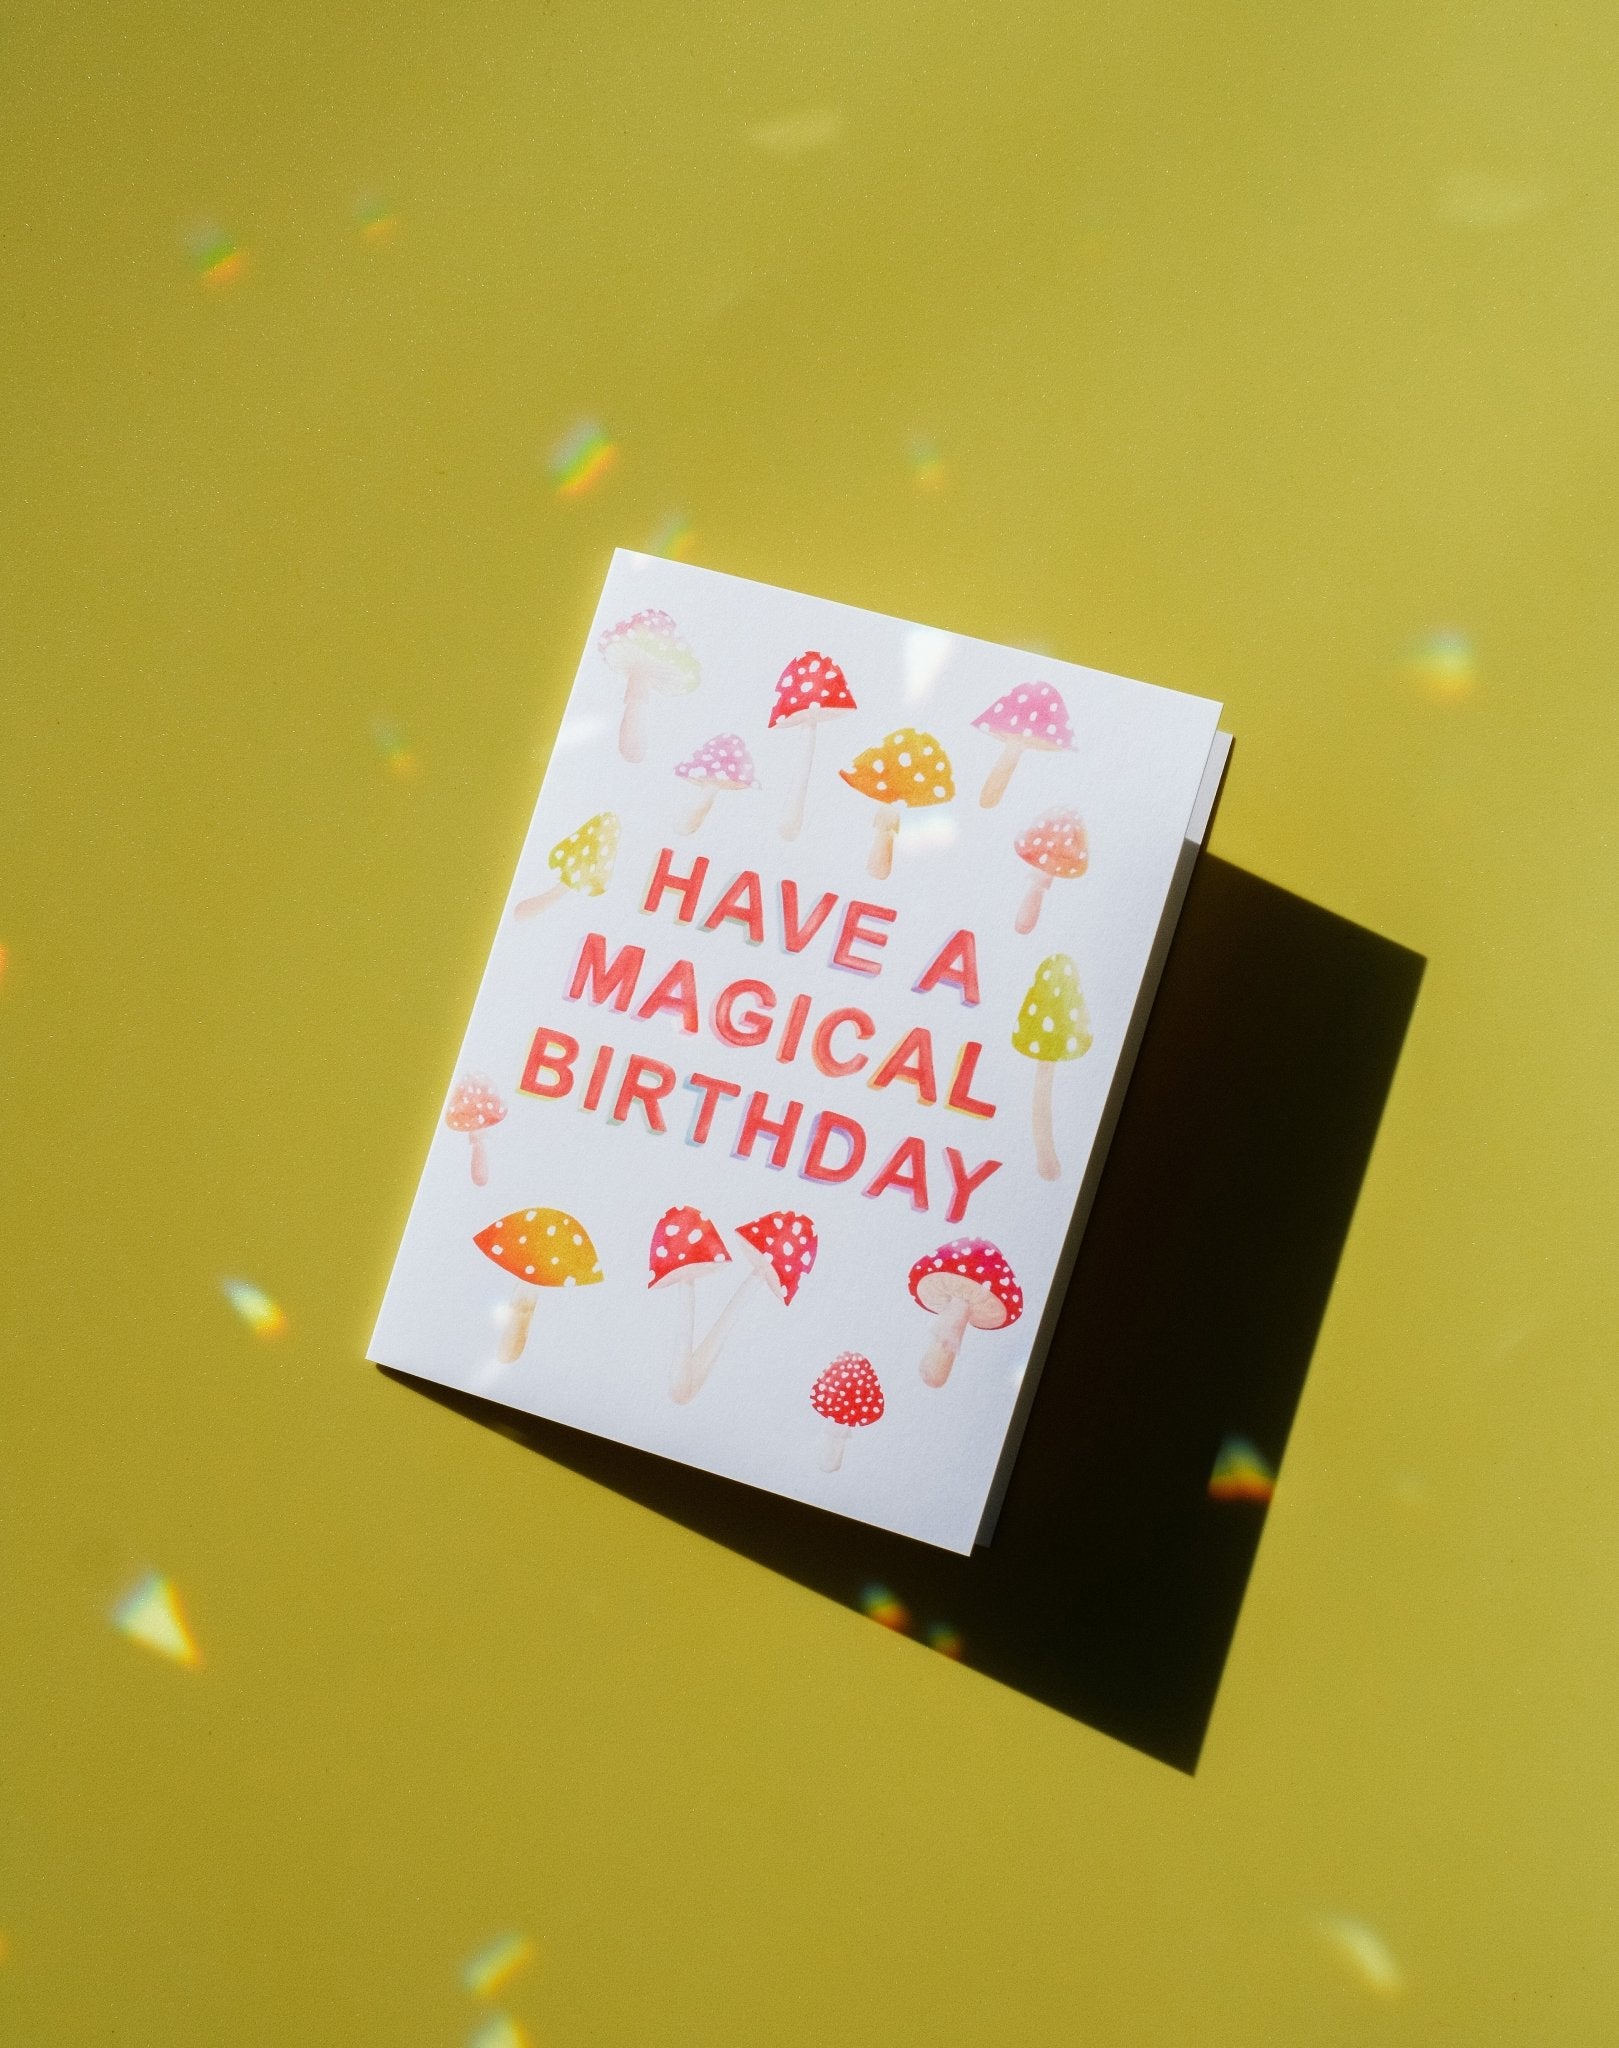 Cream colored card with pink, orange and red mushrooms and red printed text with the words "Have A Magical Birthday" in the middle. Shown on green background.